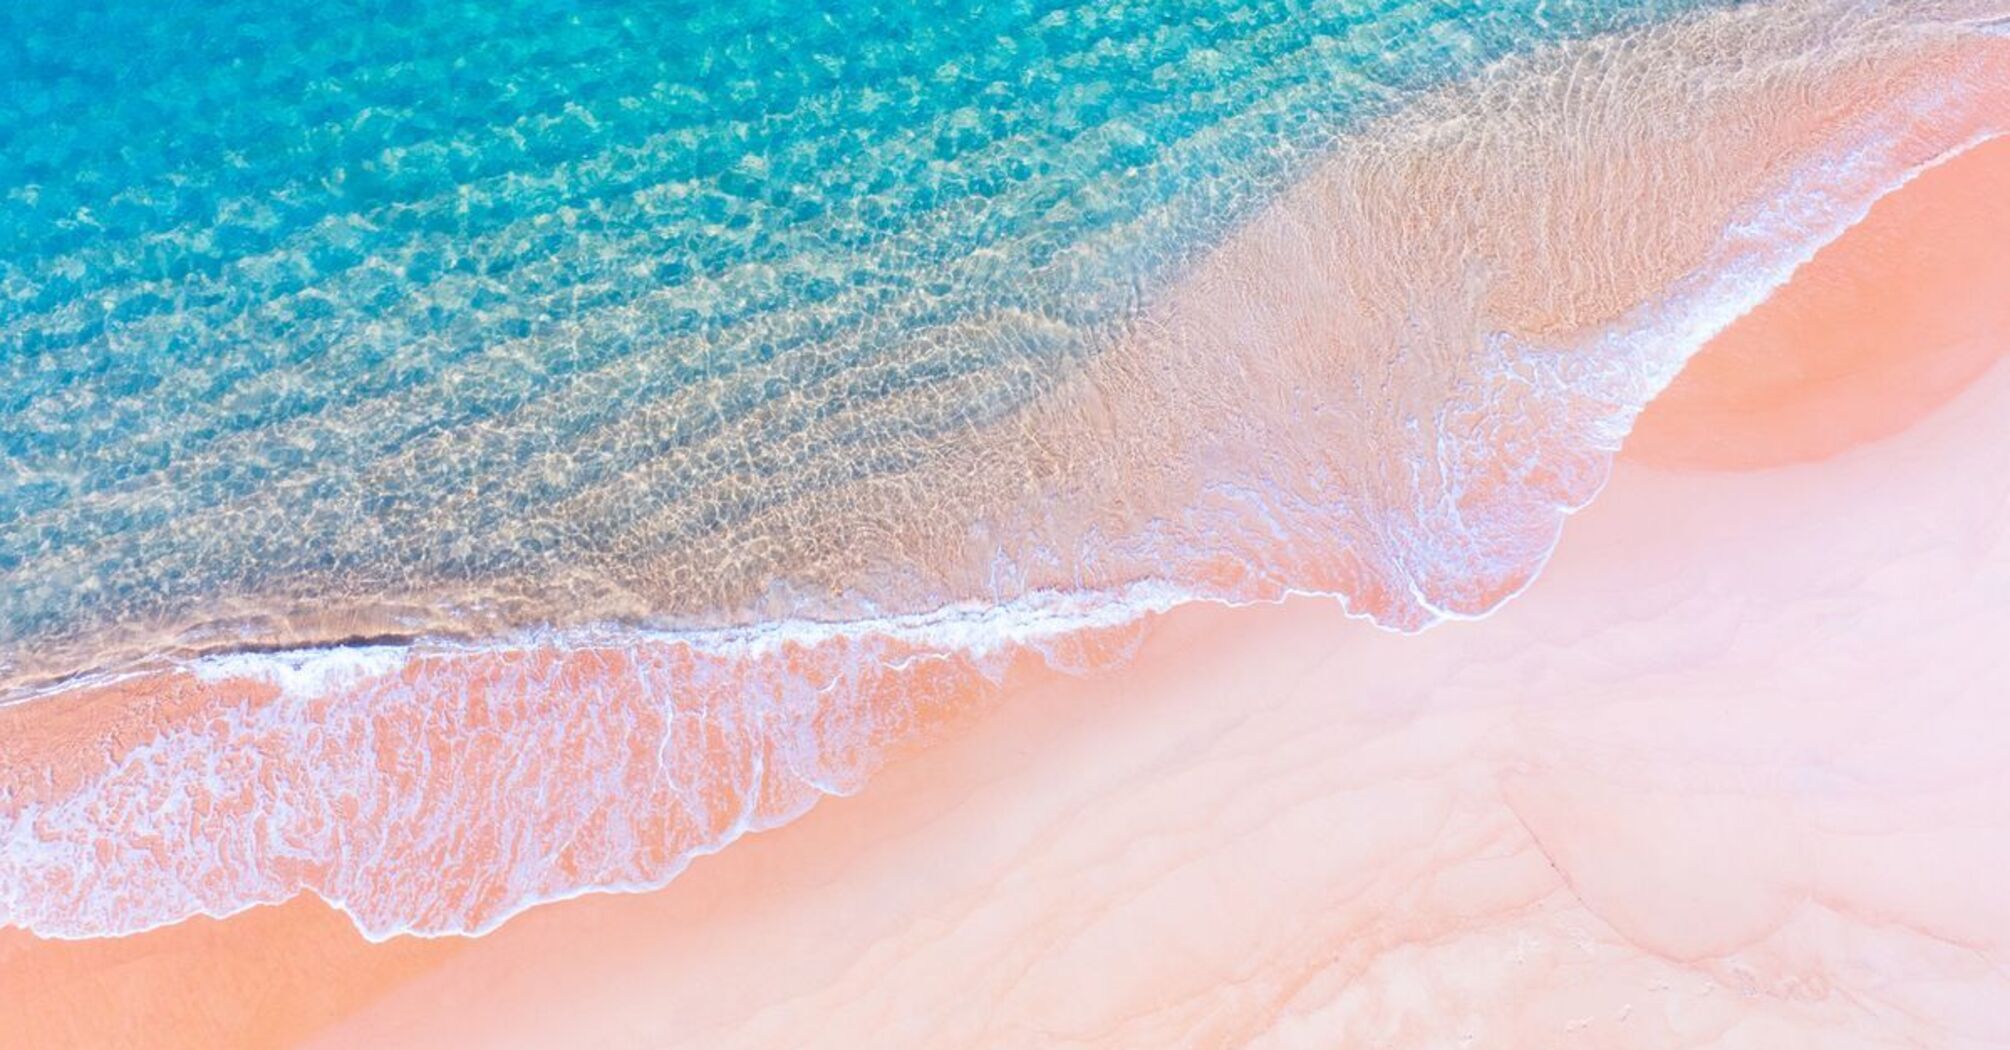 Pink beaches fascinate with their beauty